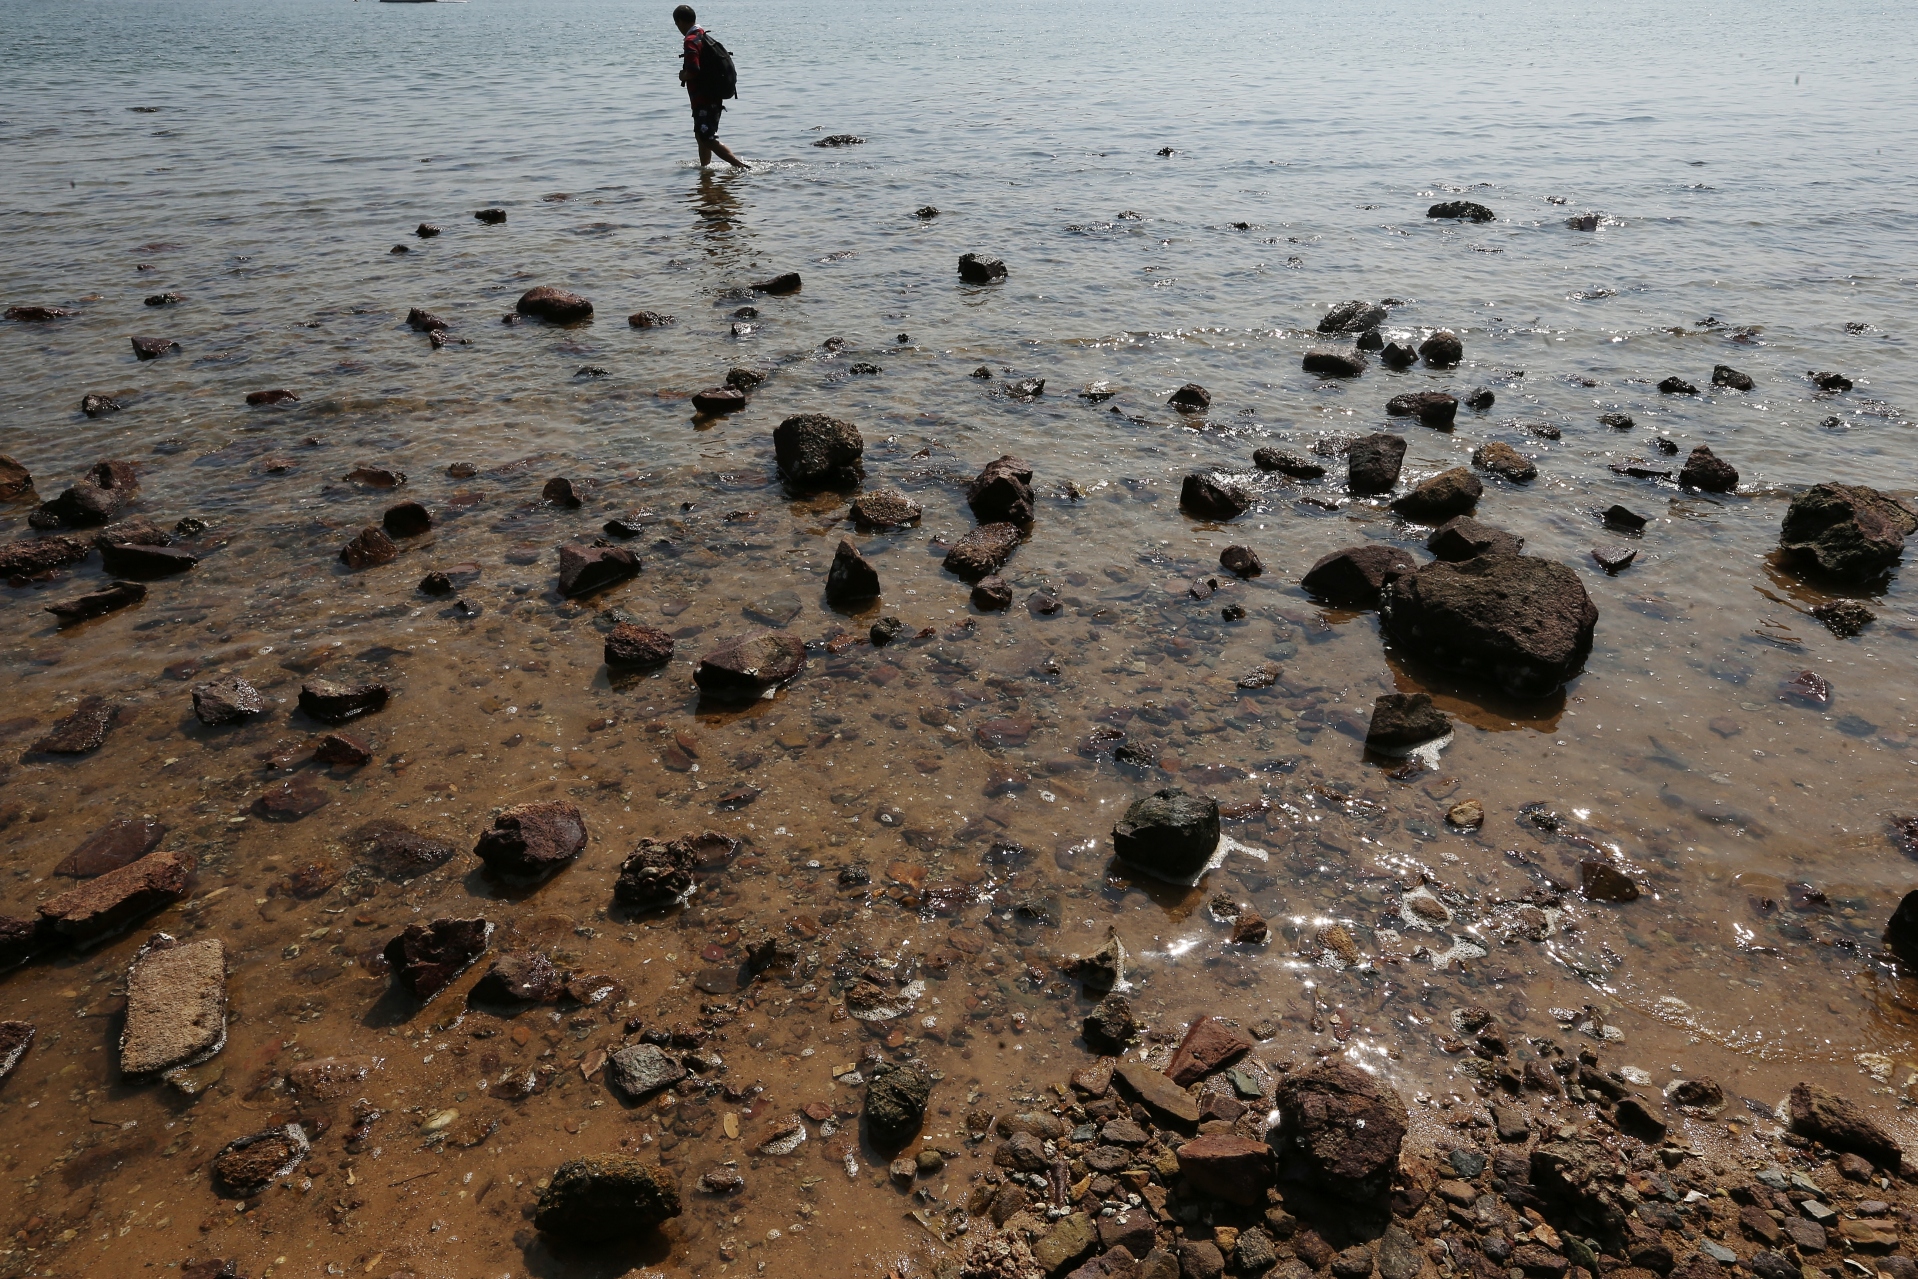 A plan to turn part of the coastline near Tai Po into an artificial beach will be going to court. Photo: Sam Tsang